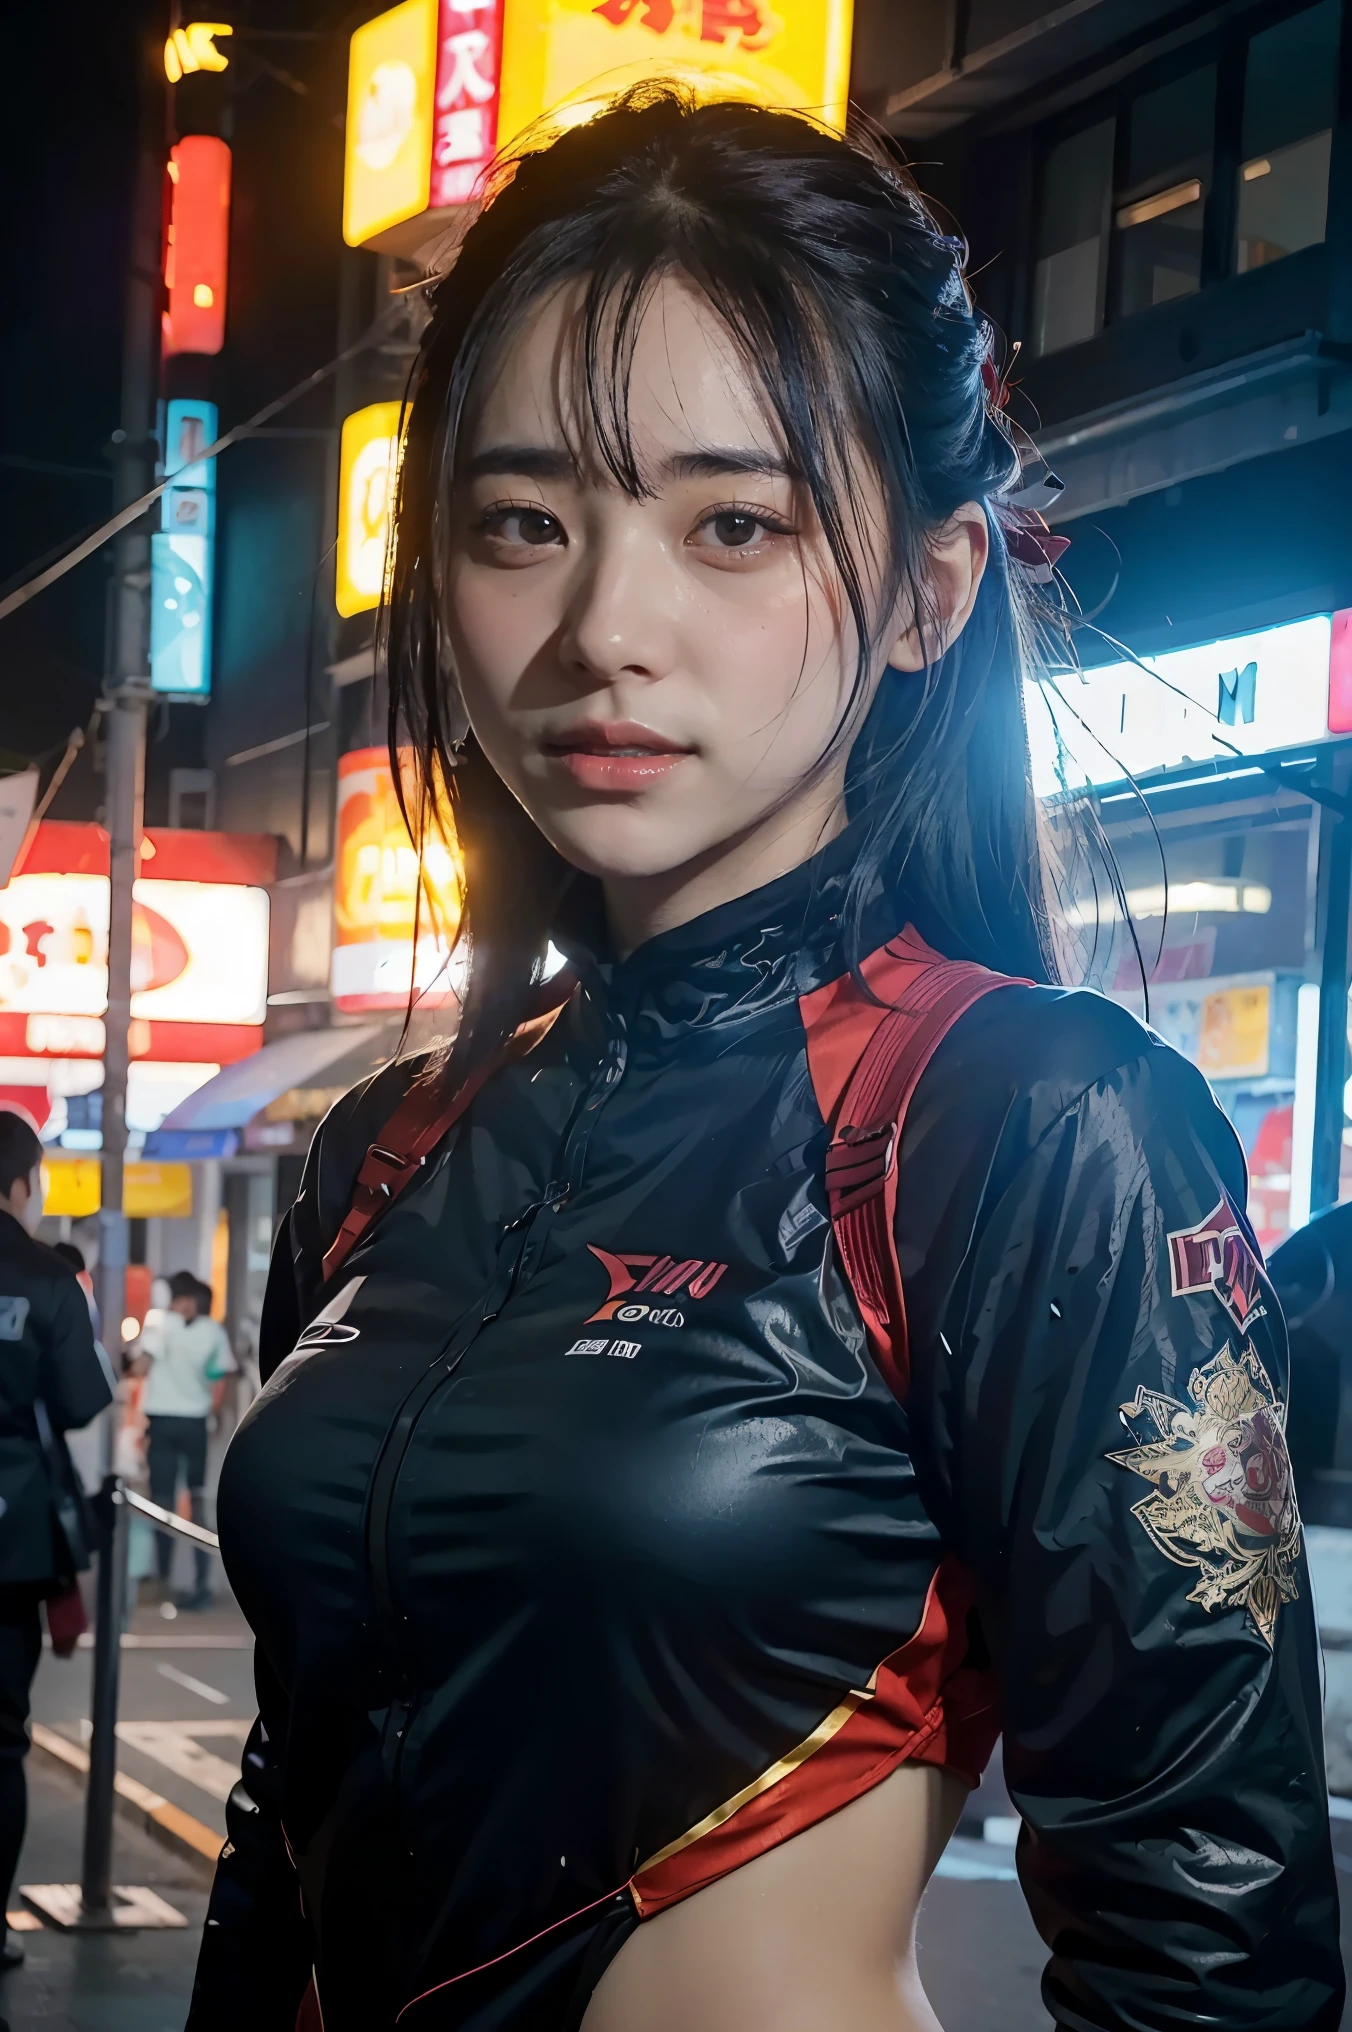 Girl in character concept art that combines Japan Ronin clothing and the beauty of modern technology.. (best quality, 4k, 8ก, height, Masterpiece:1.2), very detailed, (realistic, photorealistic, photo-realistic:1.37), Japanese ronin clothing, Future technology clothing, Detailed facial features, dynamic poses, violent expression, Katana, cyberpunk background, neon light, Mood swings, Riot Games art style, bright colors, Stylish rendering, complicated details, professional artwork, original elements, modern twist.